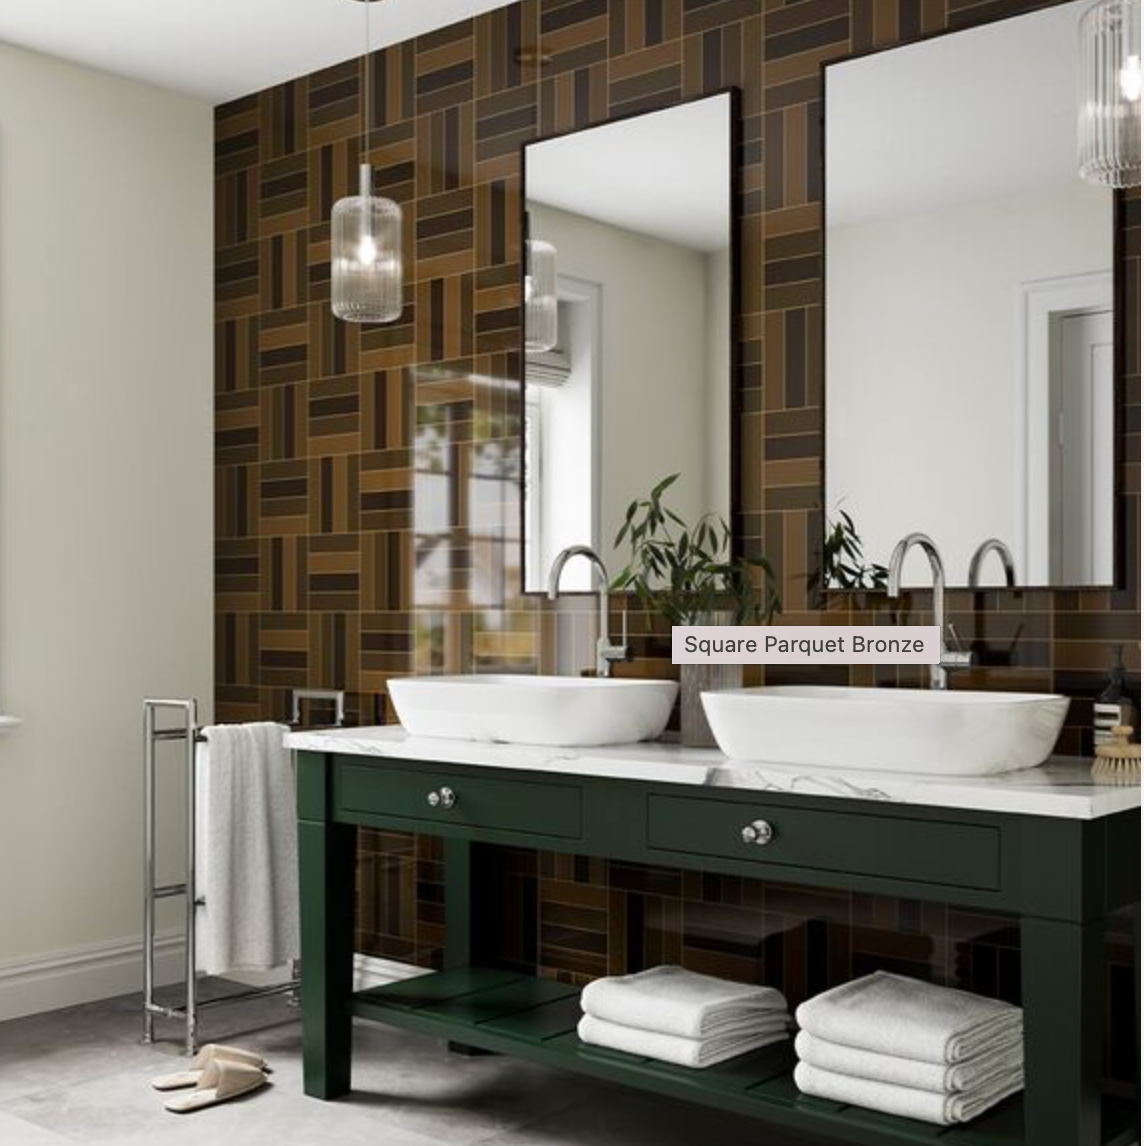 Showerwall Acrylic Patterns & Tiles Collection - Square Parquet Bronze